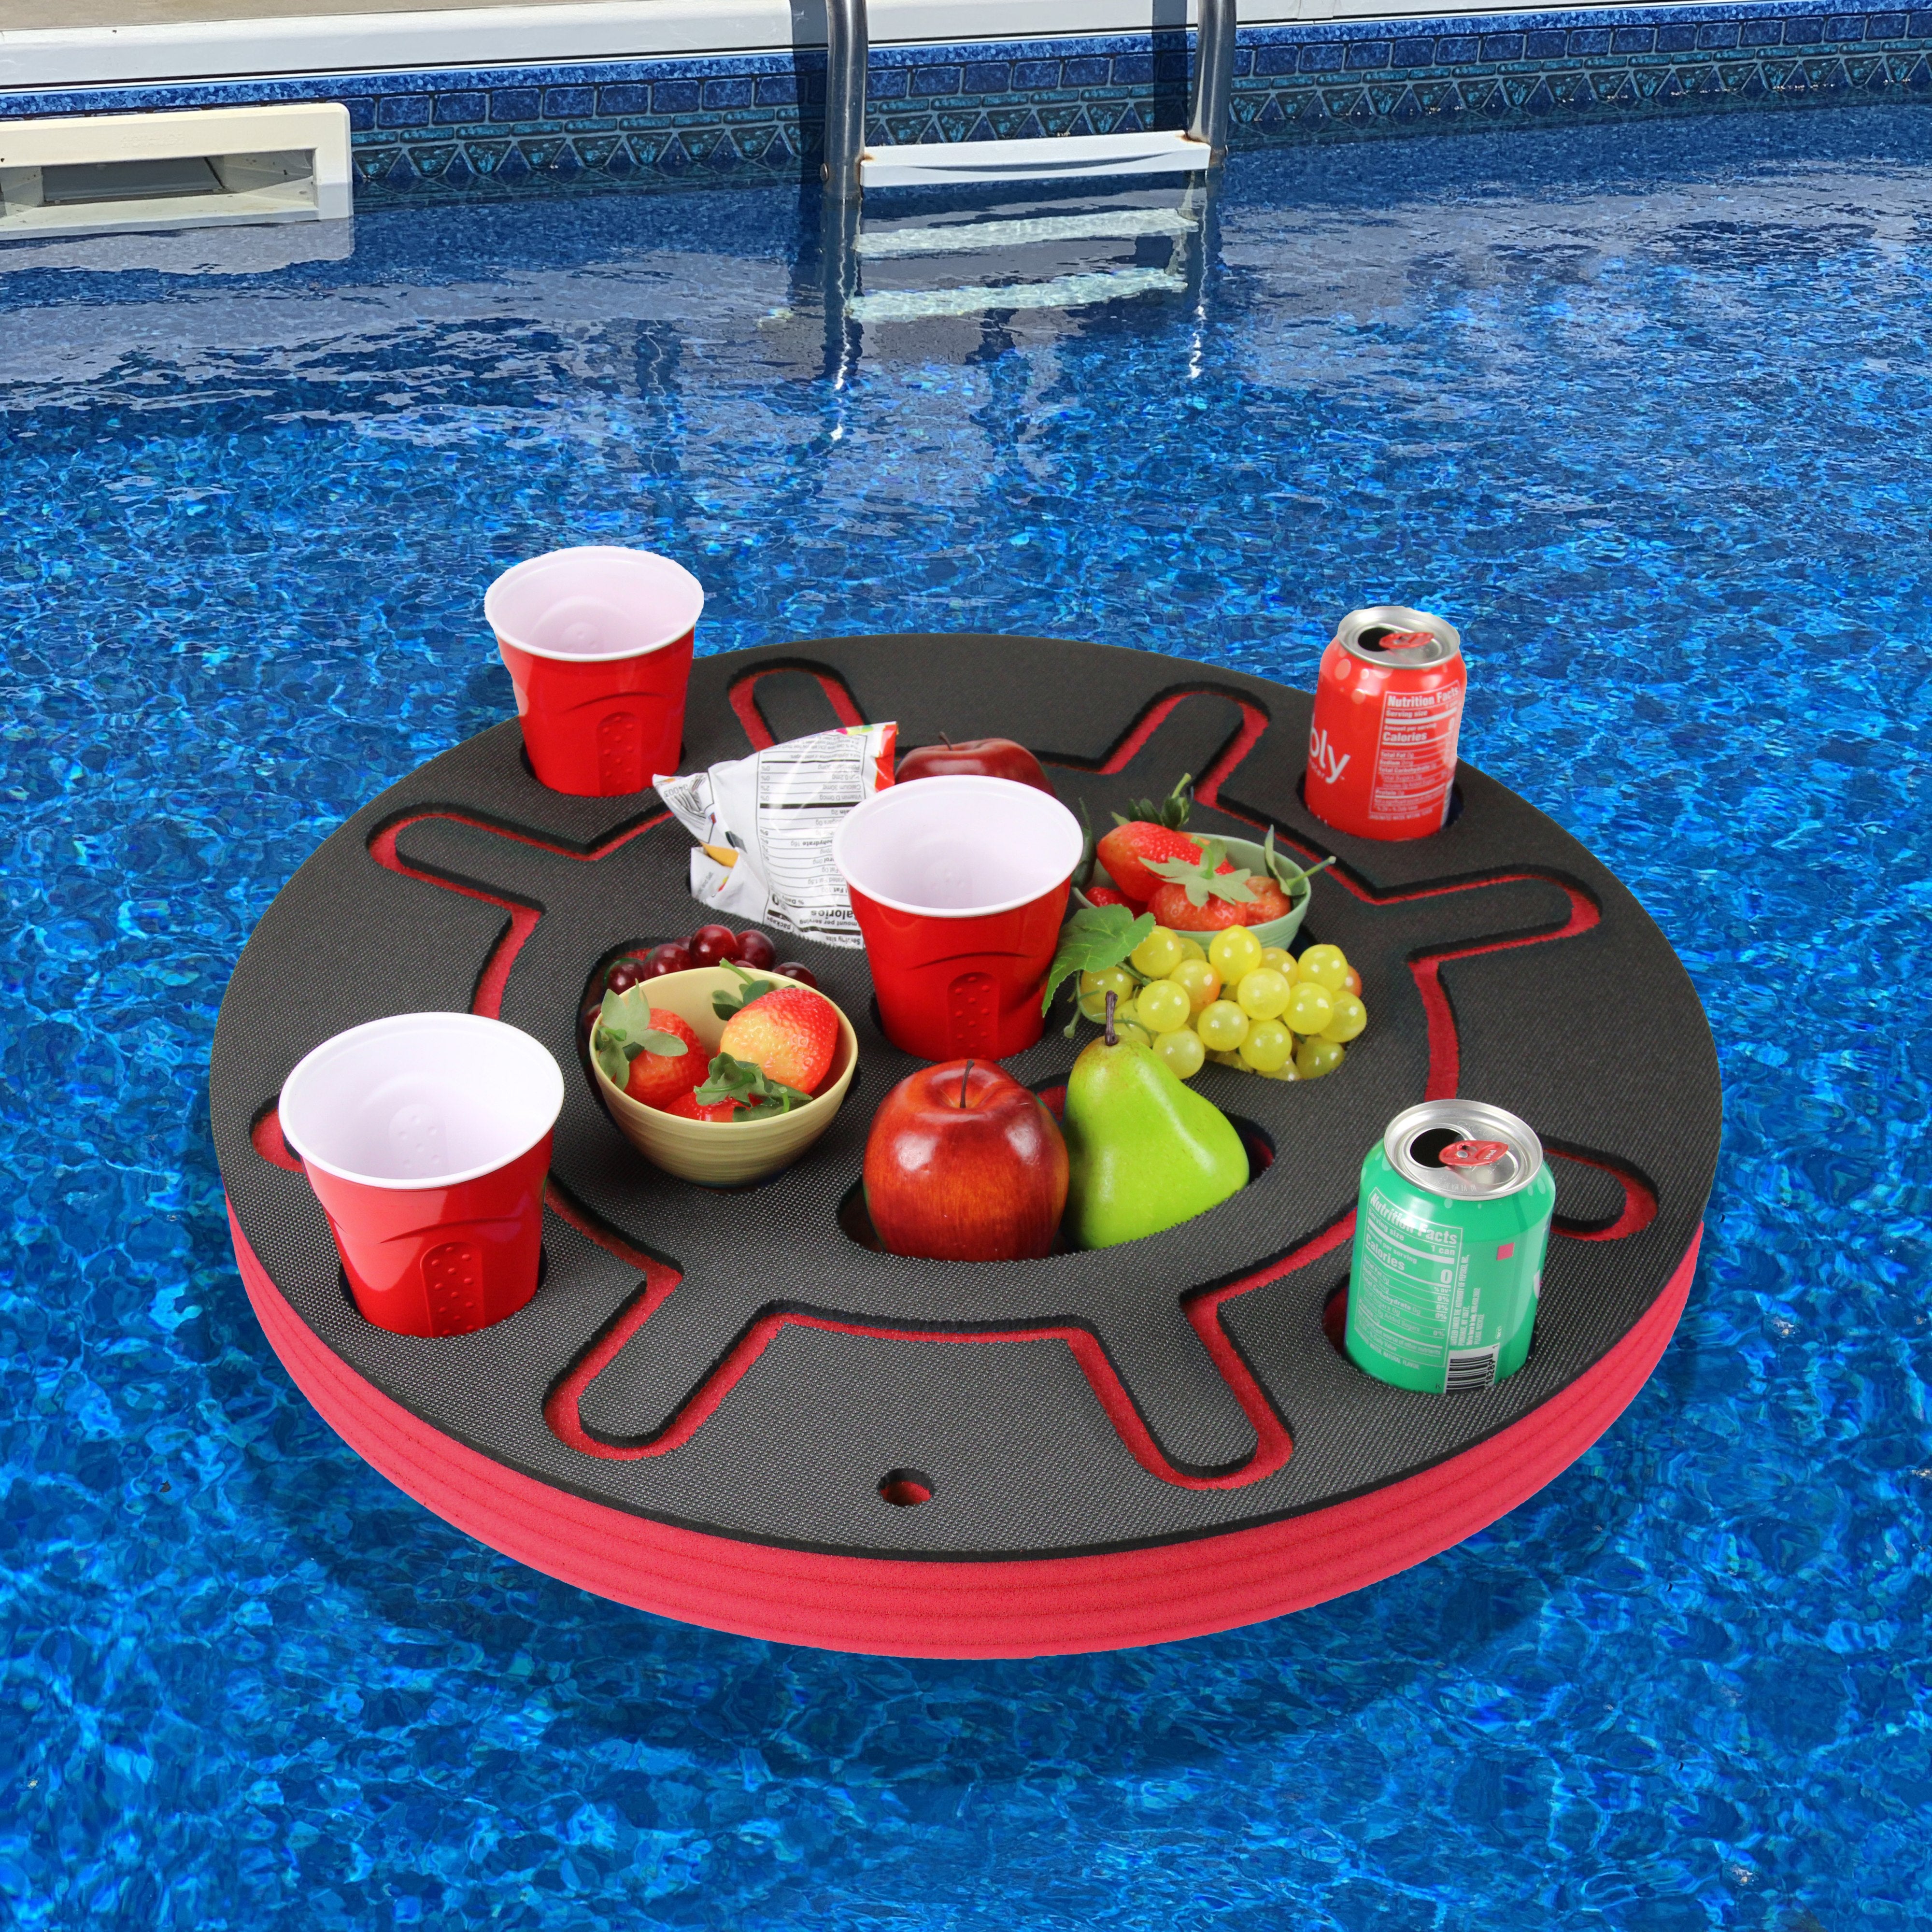 Ship Wheel Drink Holder Floating Refreshment Table Tray Pool or Beach Party Float Lounge Durable Foam 9 Compartment UV Resistant Cup Holders 2 Feet